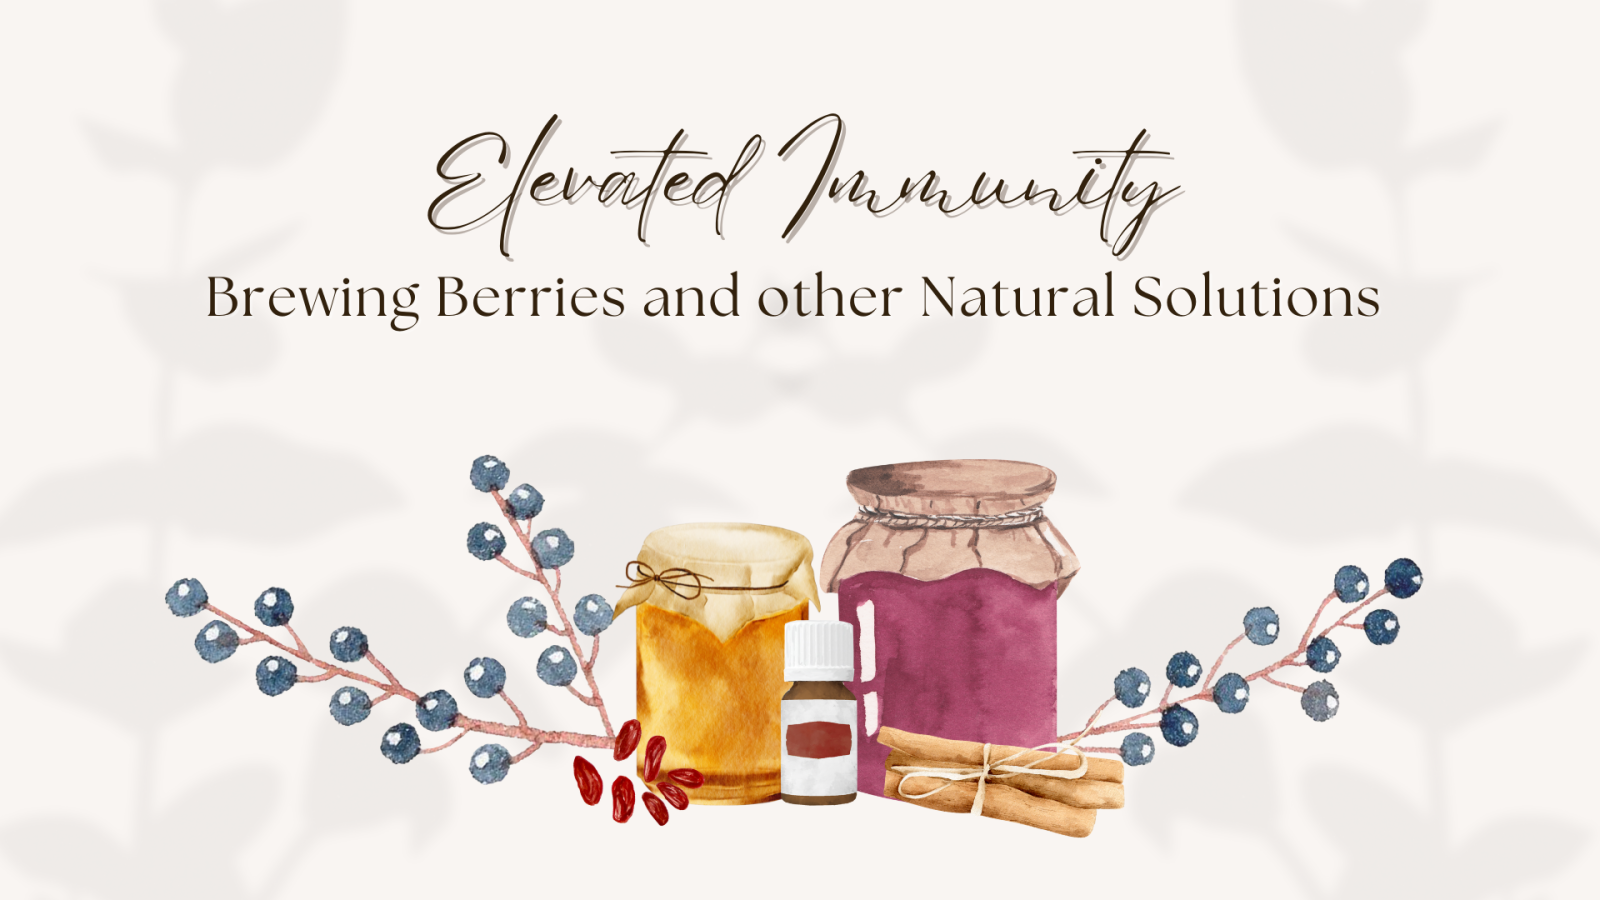 Elevated Immunity: brewing berries and other natural solutions